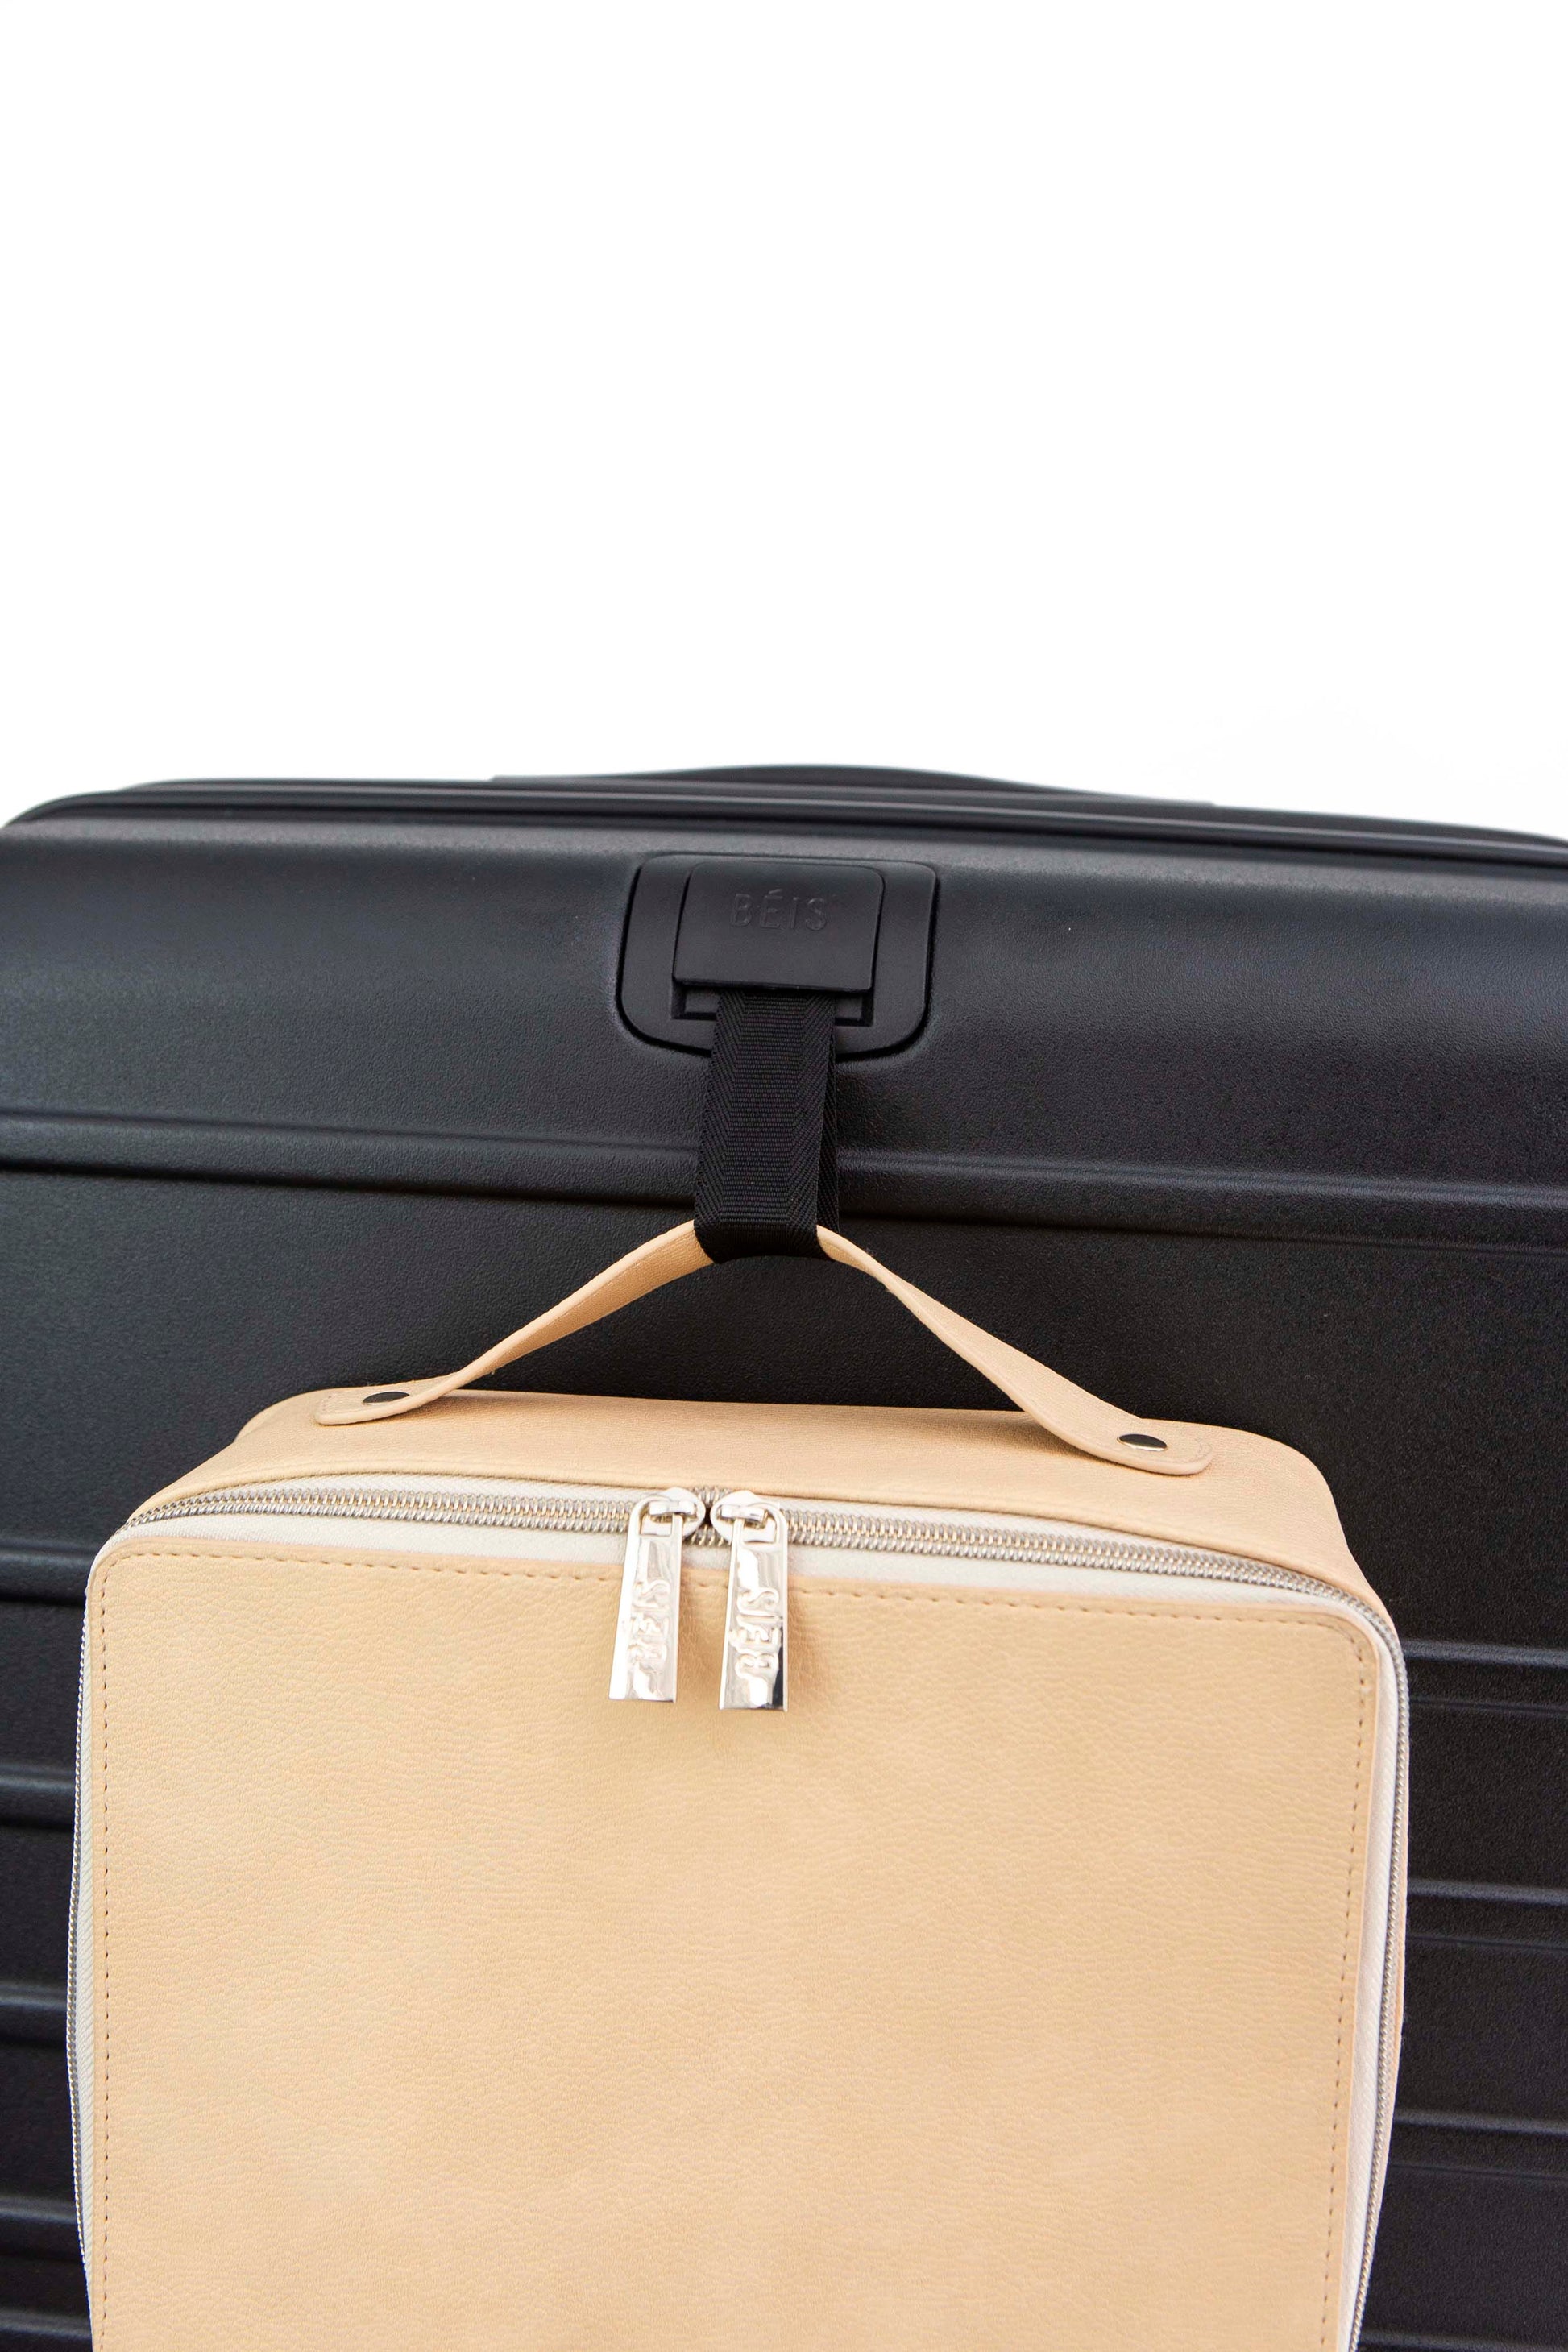 Louis Vuitton Carry-On Luggage: An Exclusive First Look